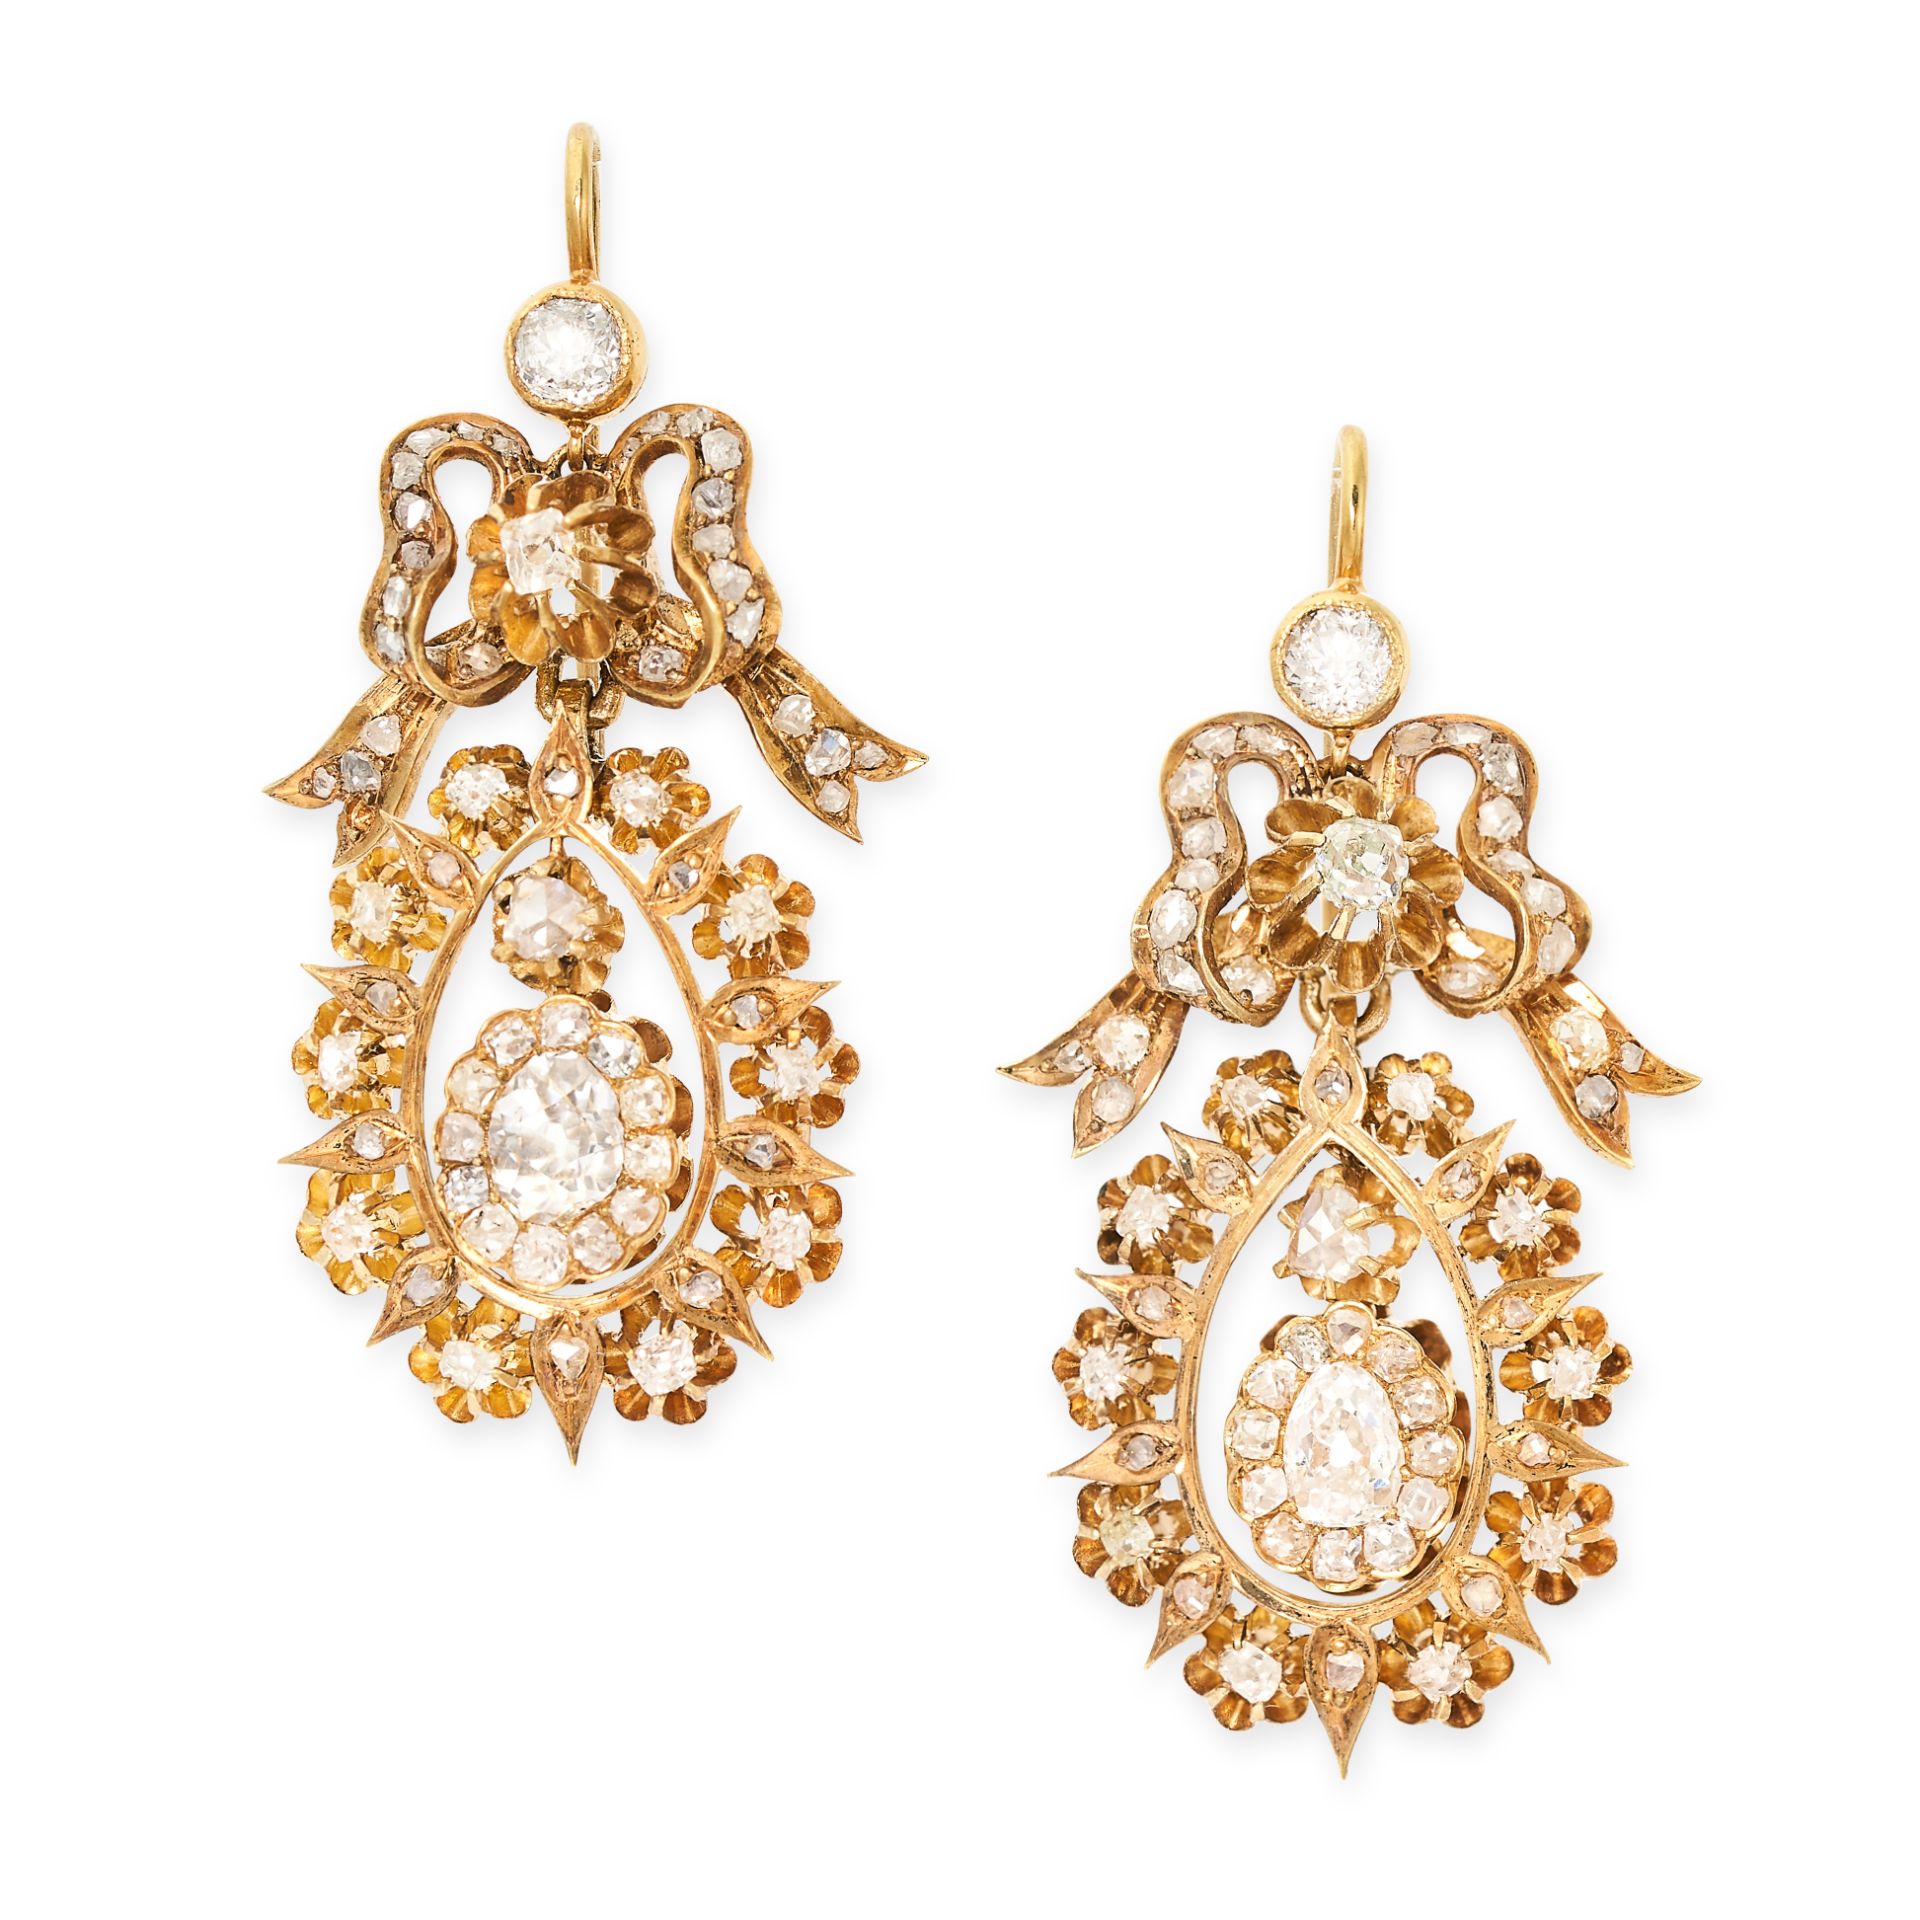 A PAIR OF ANTIQUE DIAMOND DROP EARRINGS in yellow gold, each  designed as a ribbon tied as a bow